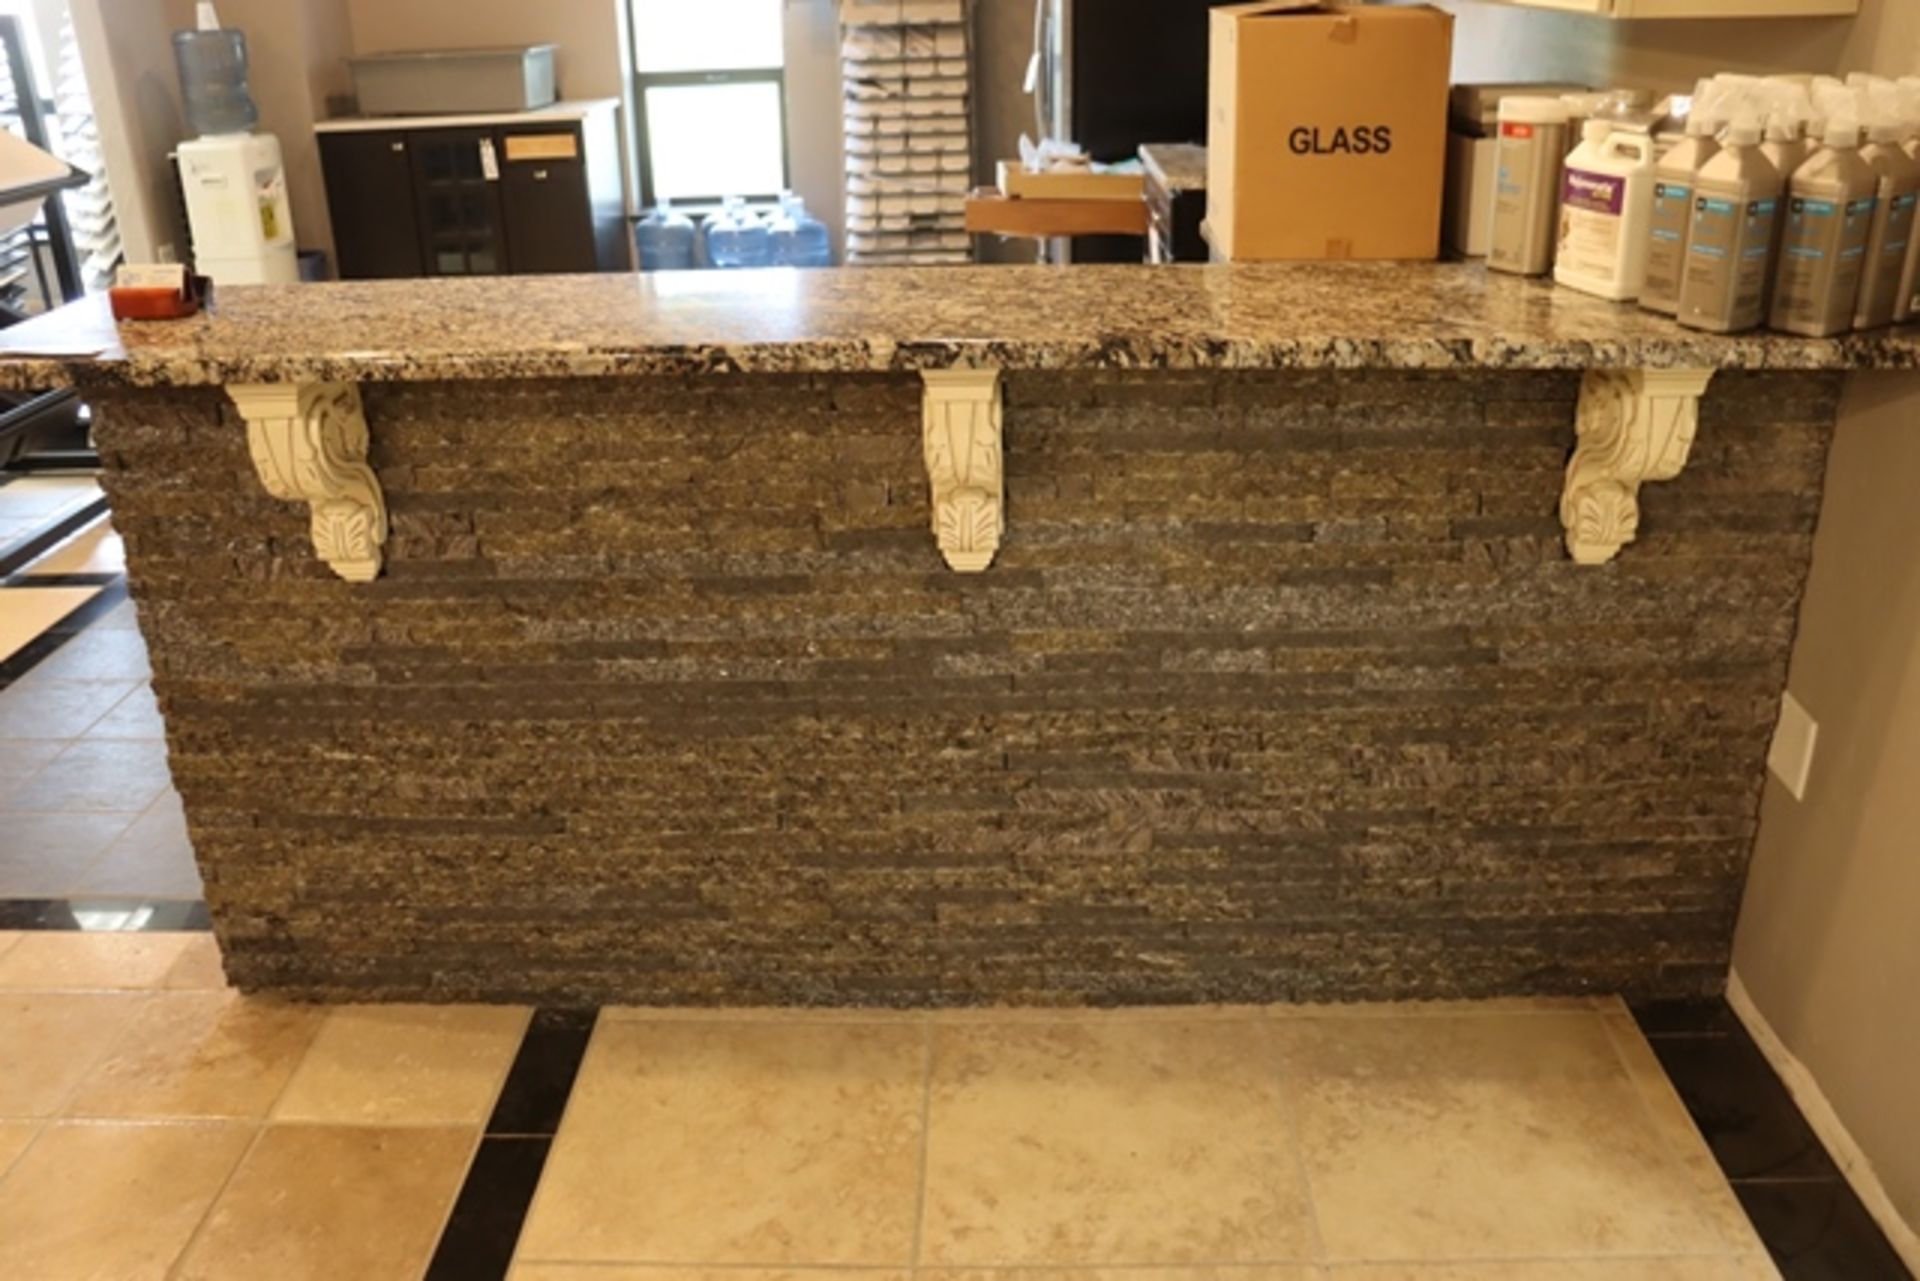 18" x 90" x 42" tall stone front bar with granite top